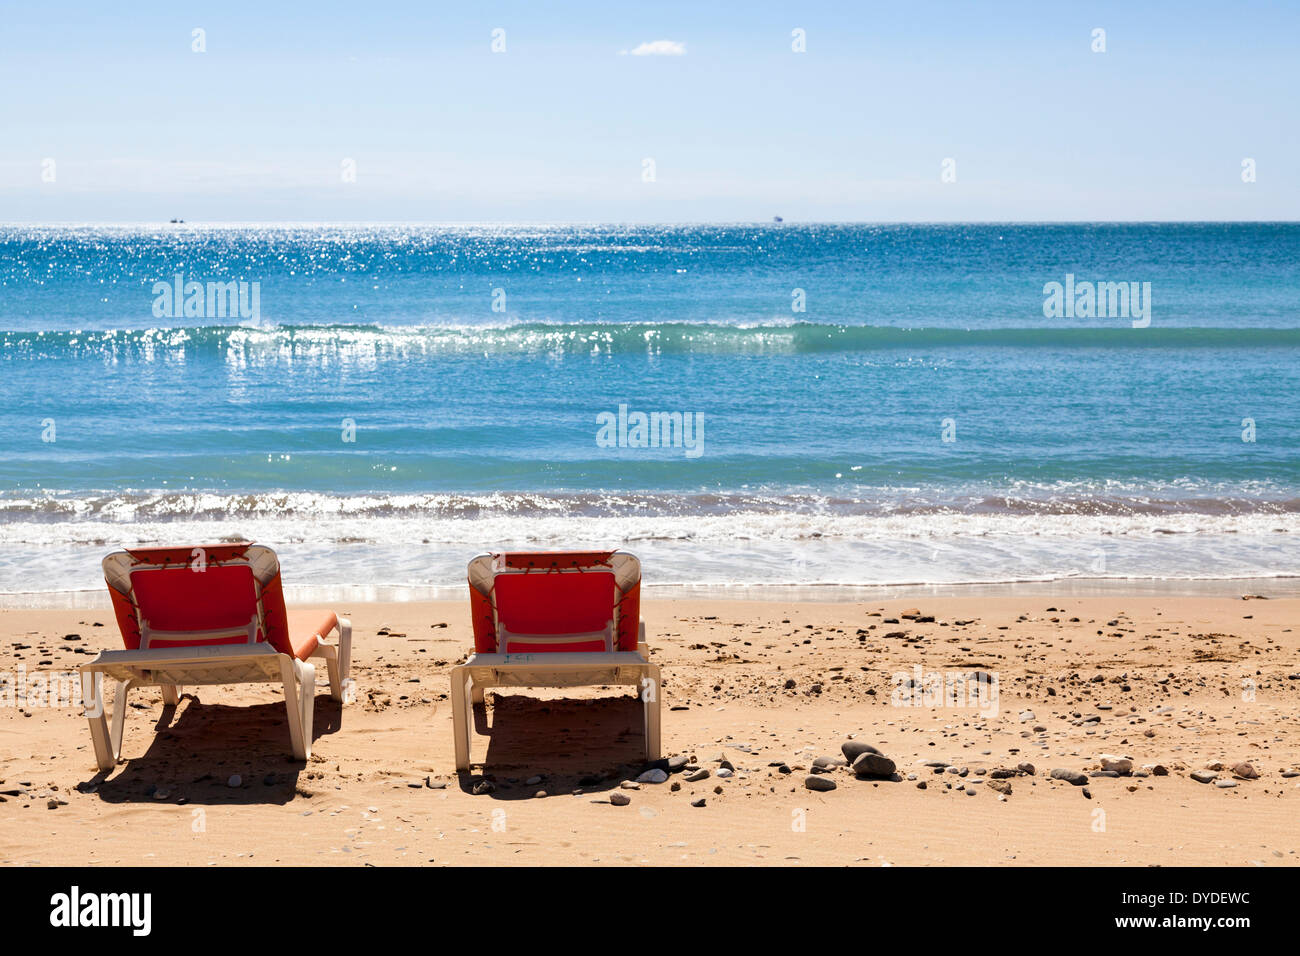 Two unoccupied red sun loungers on beach by sea. Stock Photo